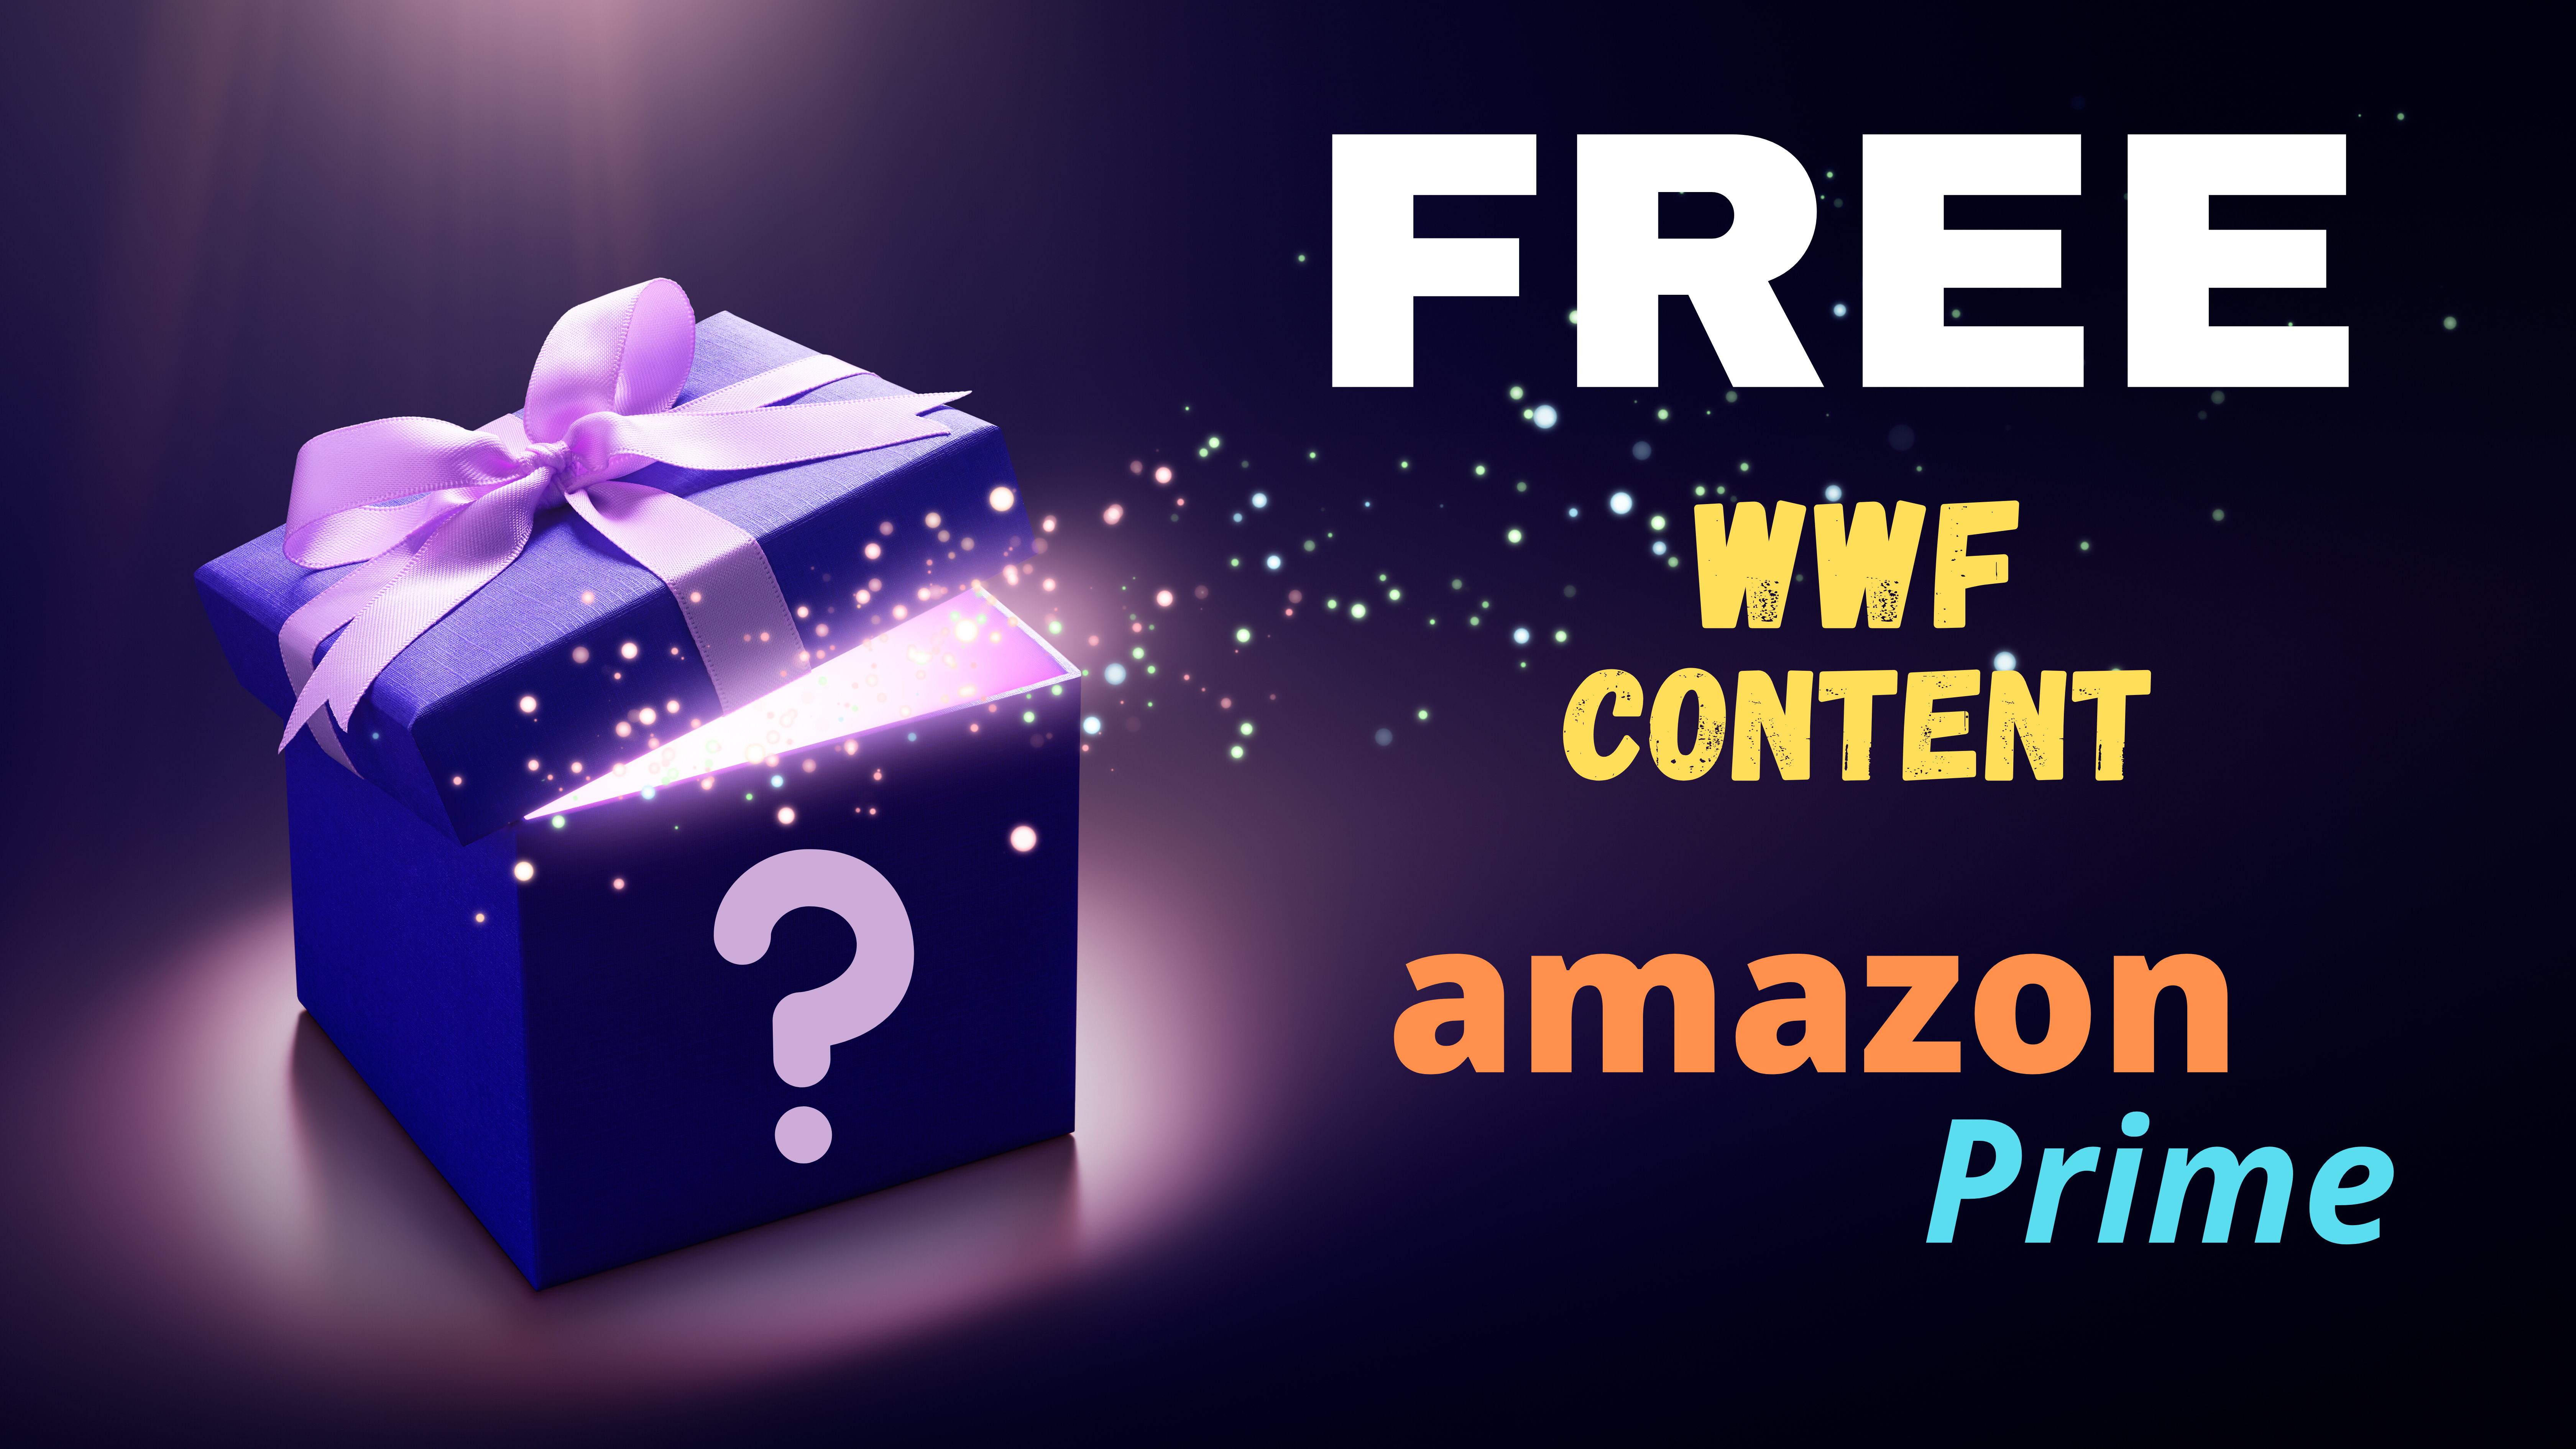 Purple background.Text: Free WWF Content, Amazon Prime. Picture of purple present with bow on top and question mark on the front side.